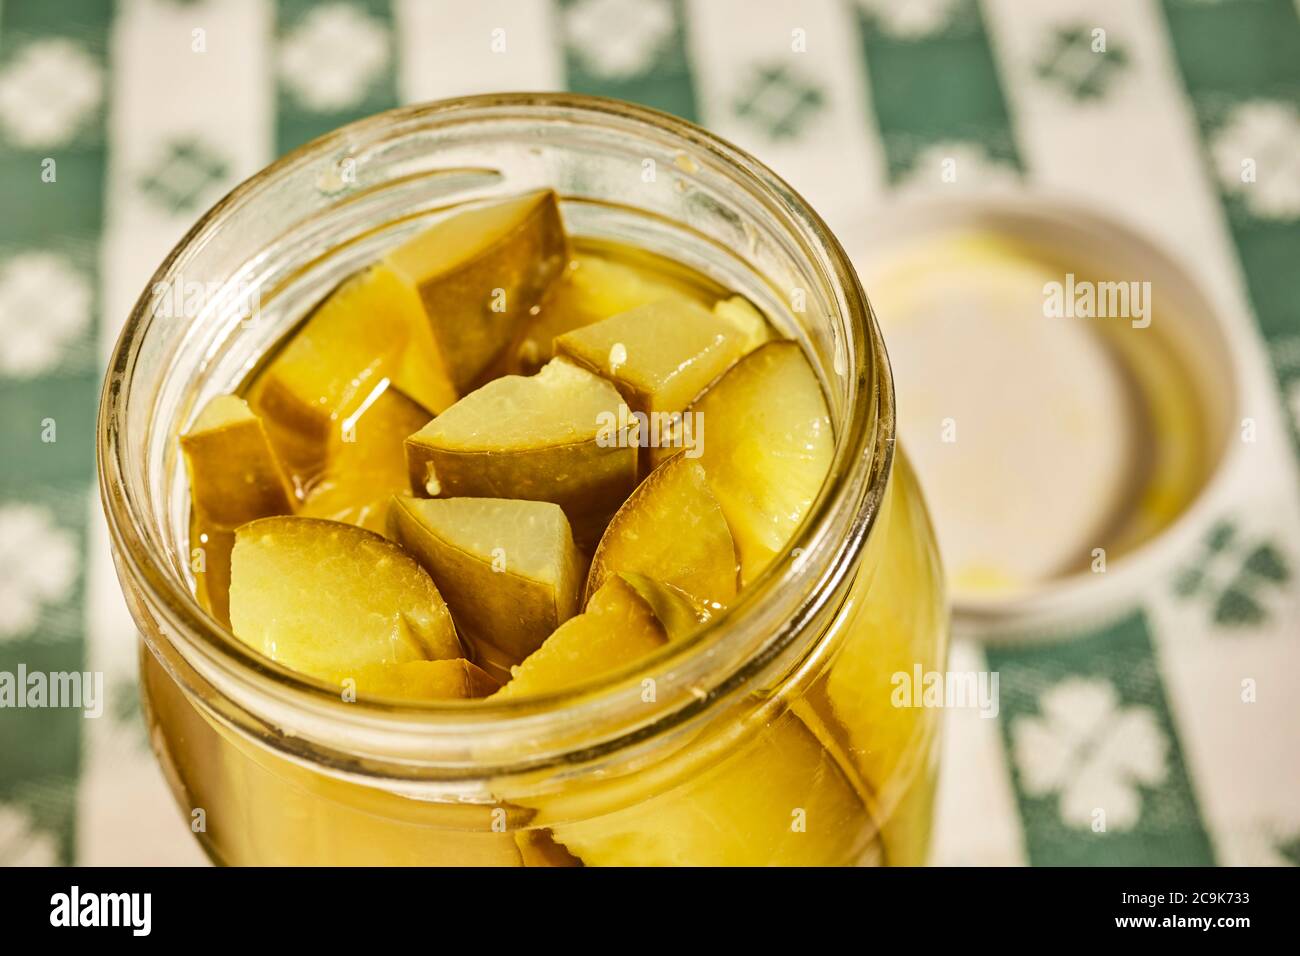 A jar of cucumber pickles from an Amish food artisan in Lancaster, Pennsylvania; USA Stock Photo